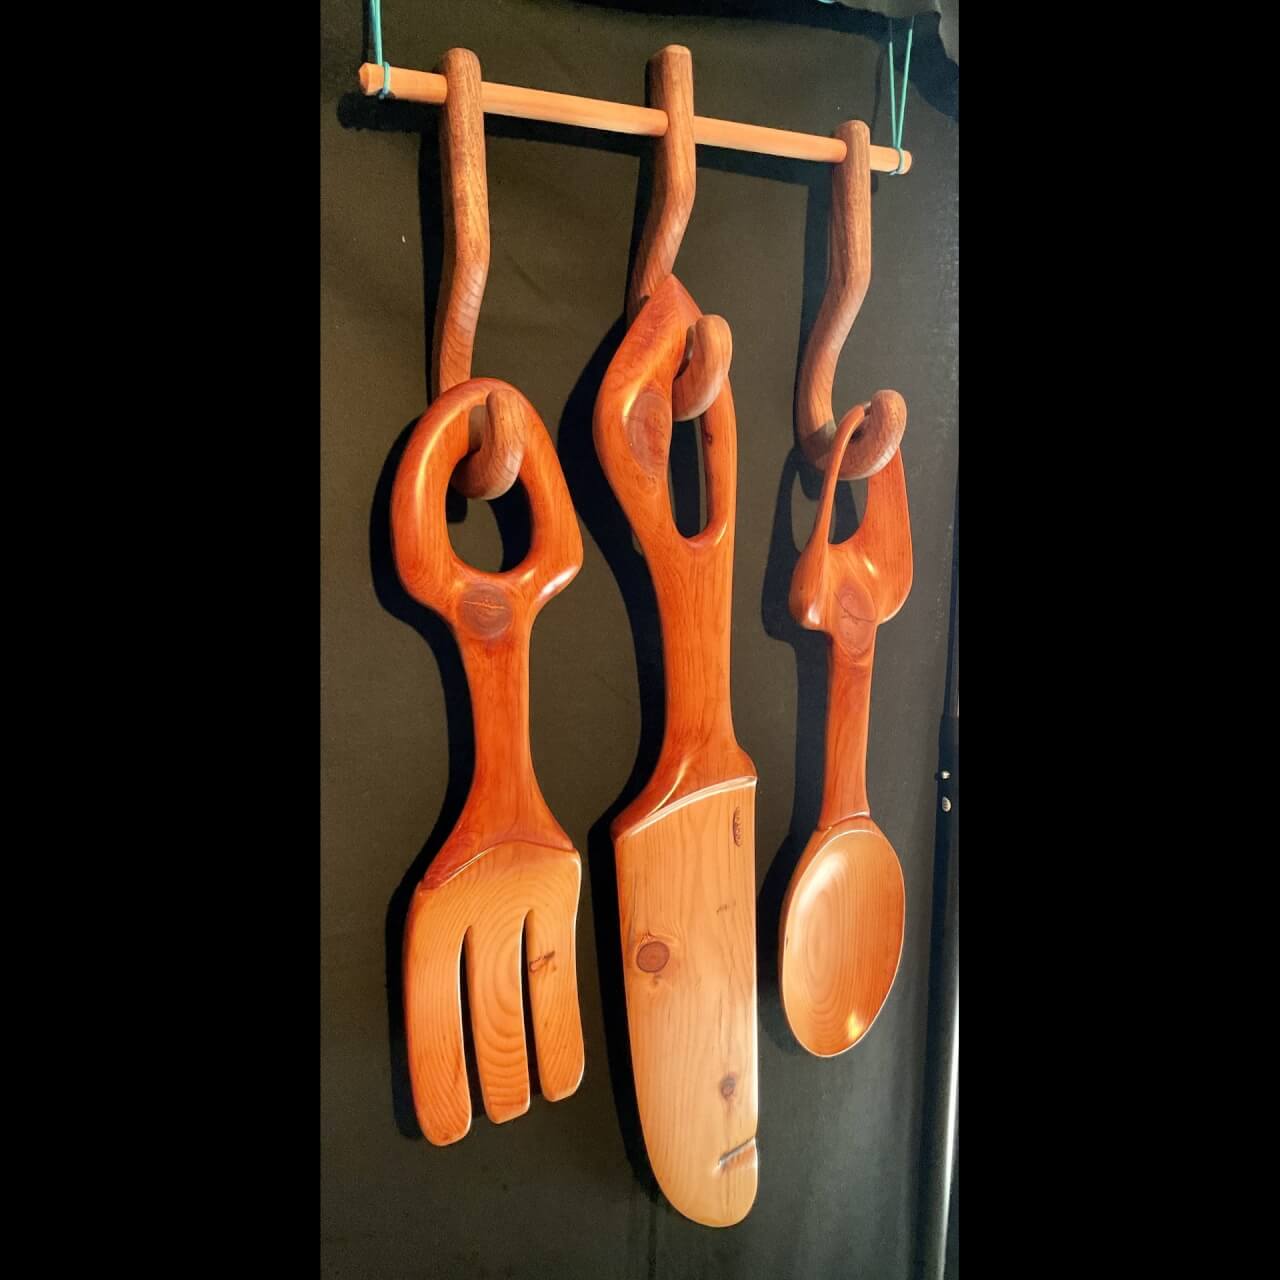 Rchardson wooden spoons hanging